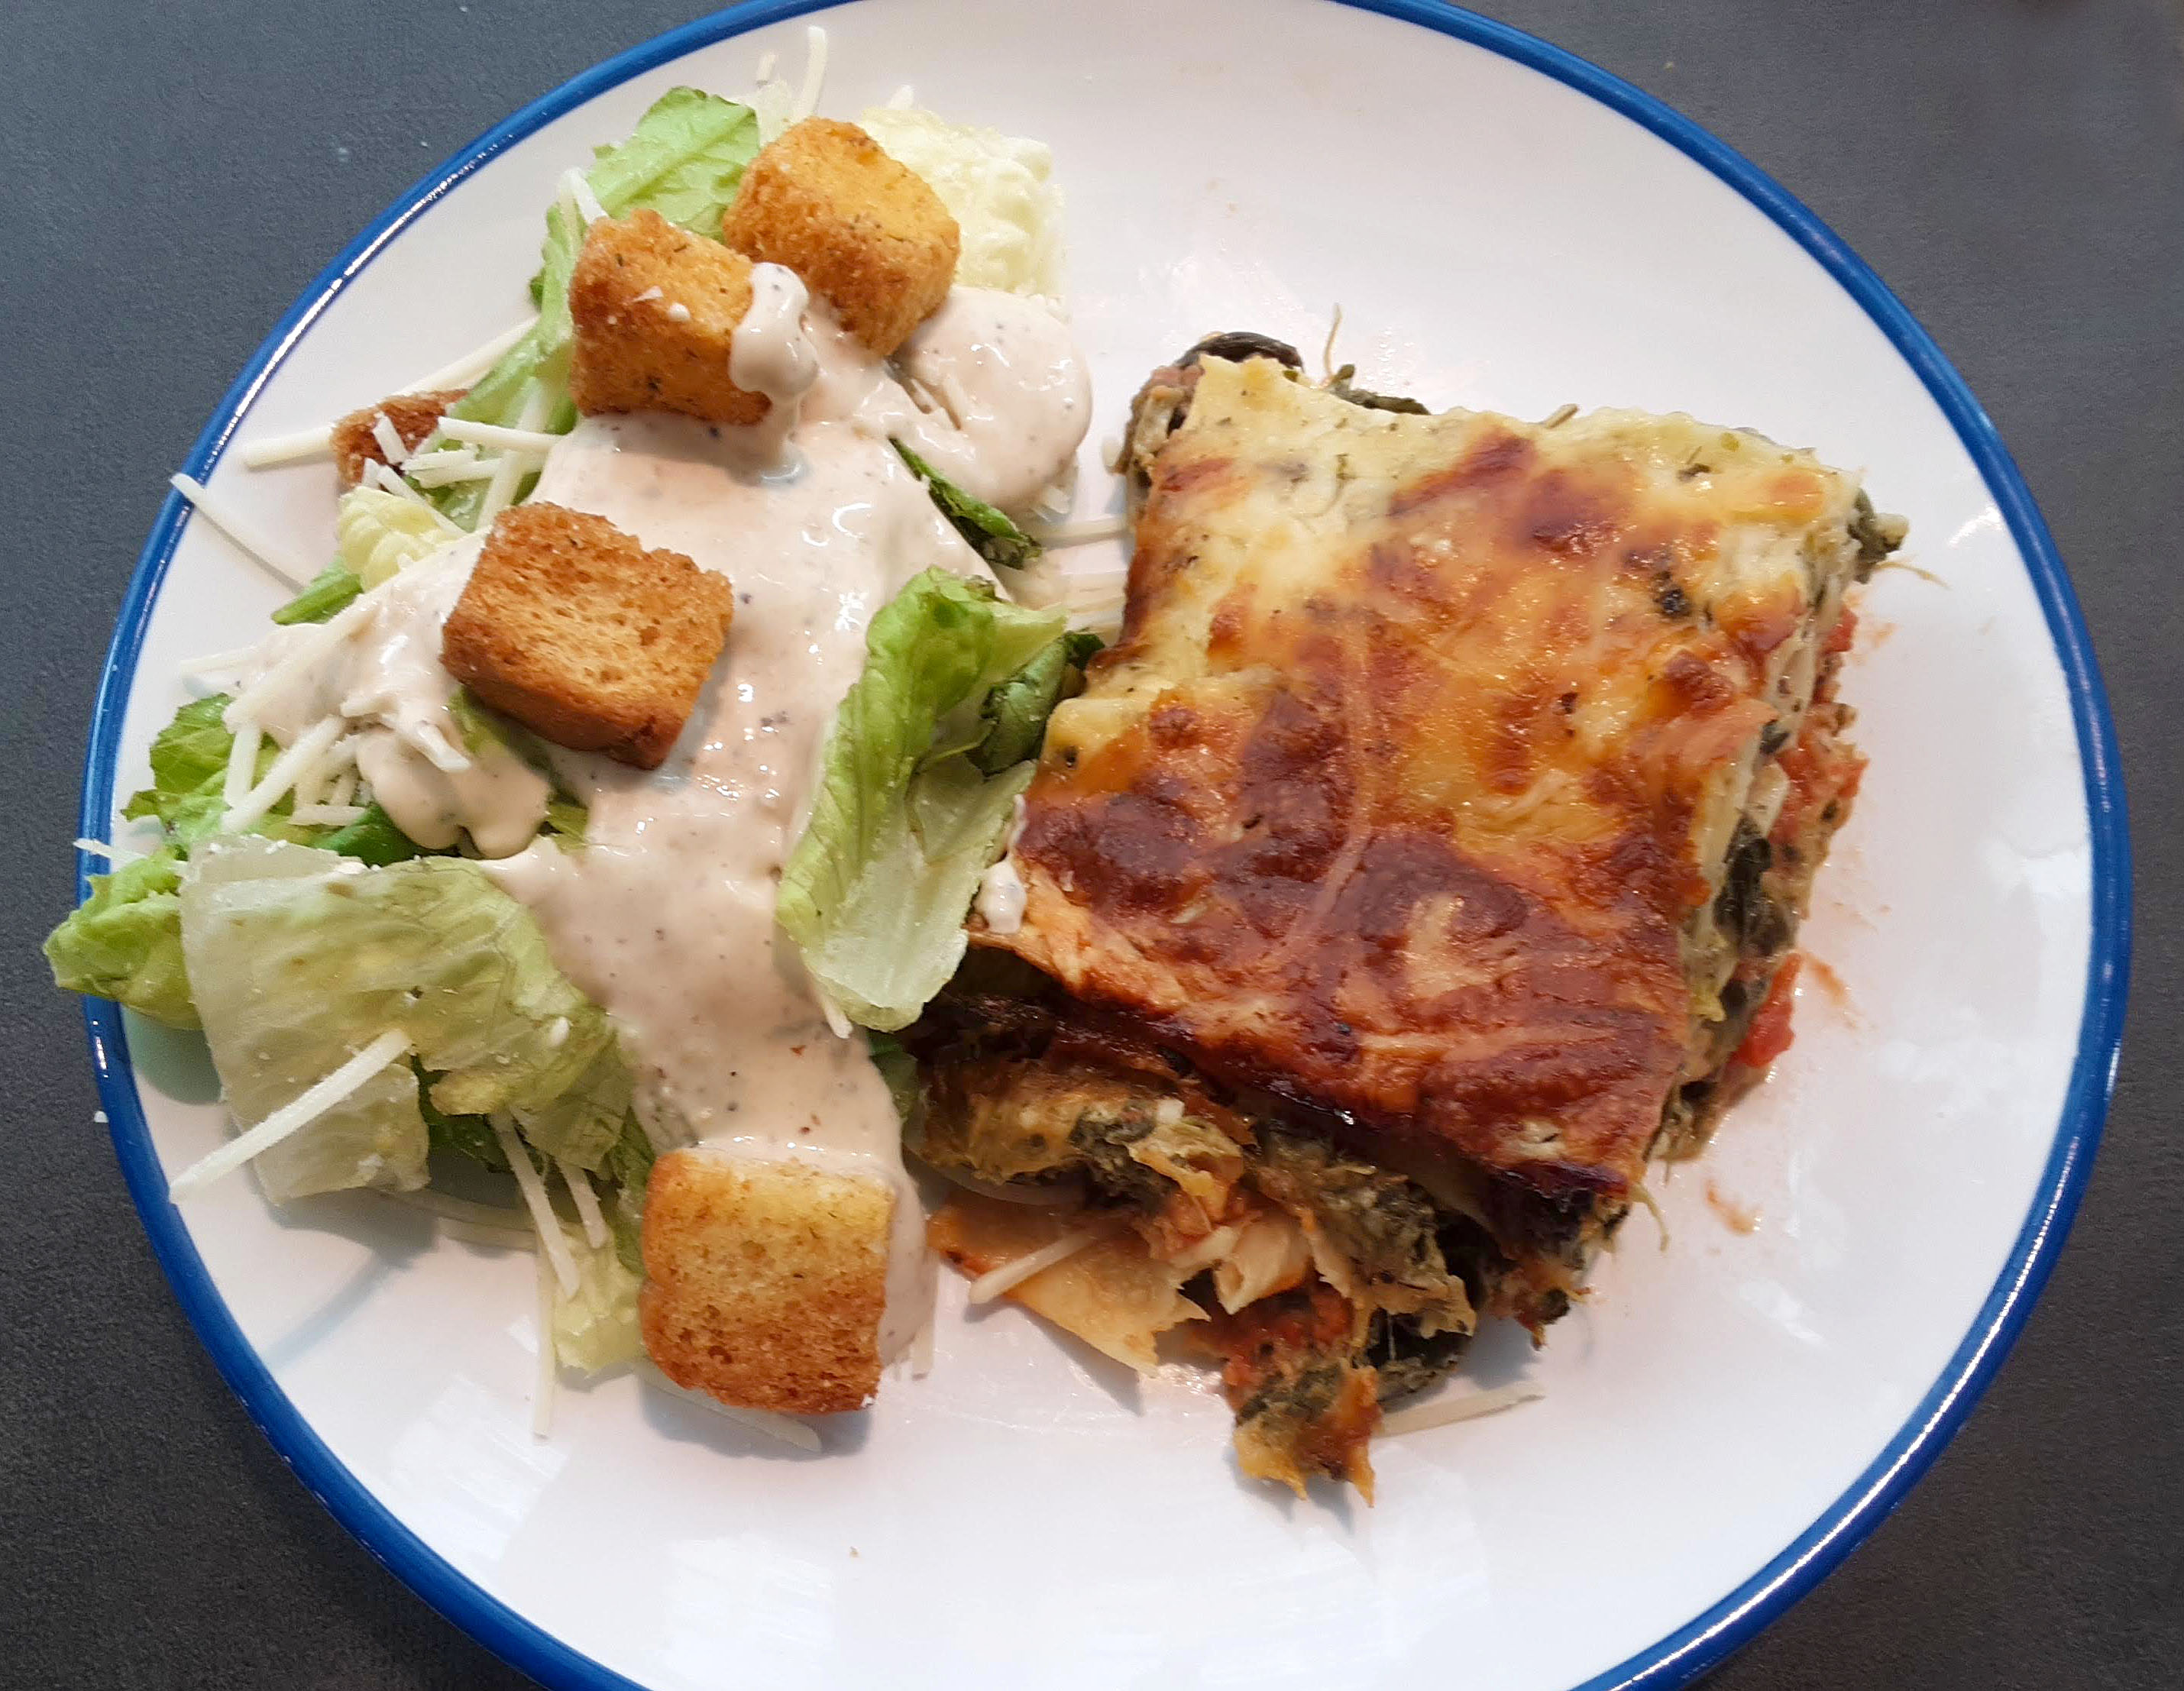 On a white circular plate with a blue rim, there is a lasagna with a side salad. Photo by Paul Young.